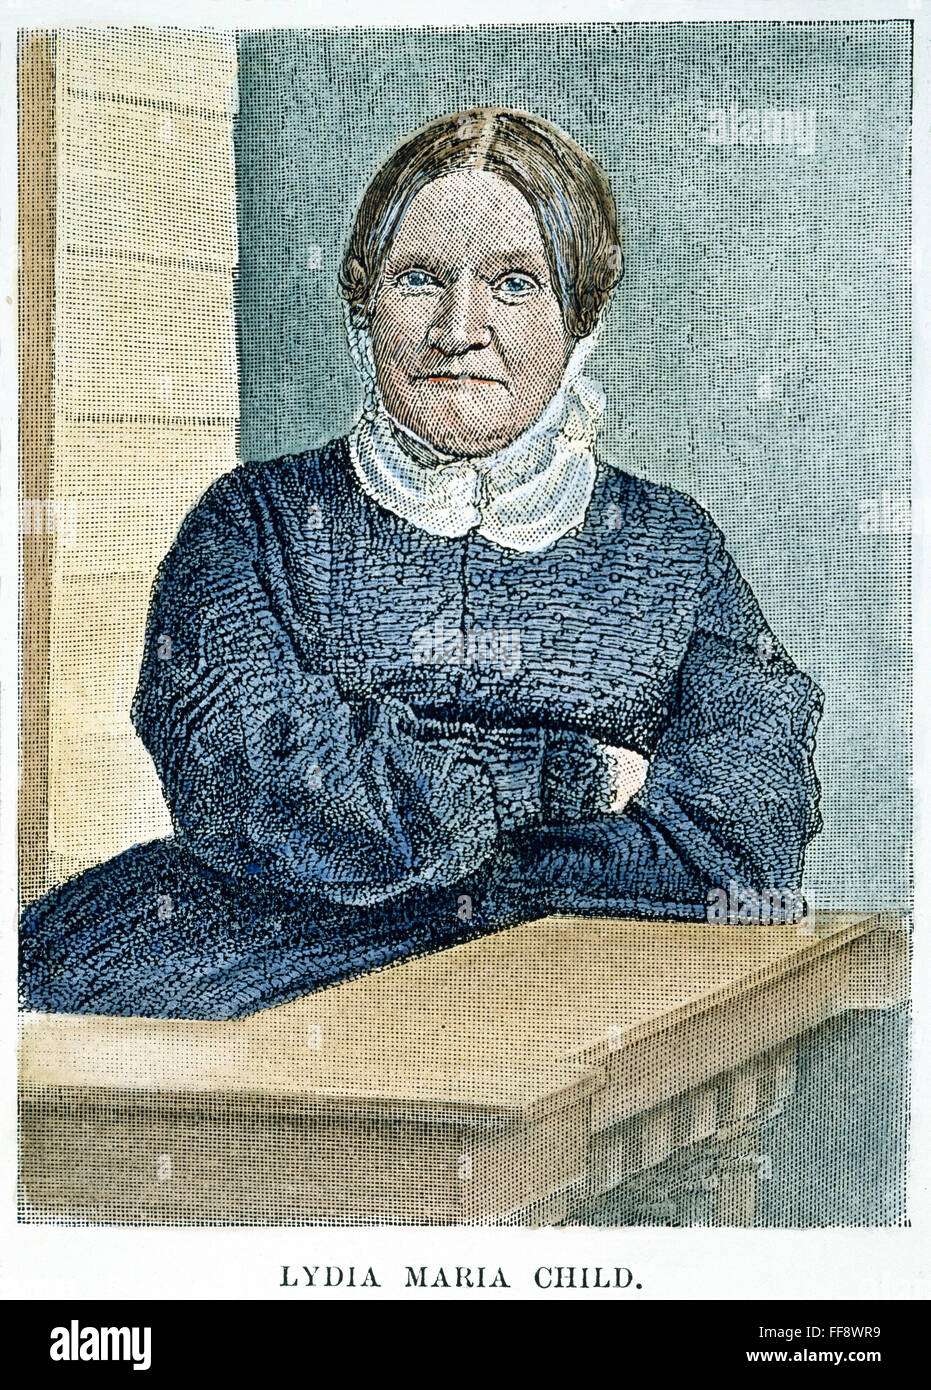 LYDIA MARIA CHILD (1802-1880). /nAmerican reformer and author. American engraving, 19th century. Stock Photo